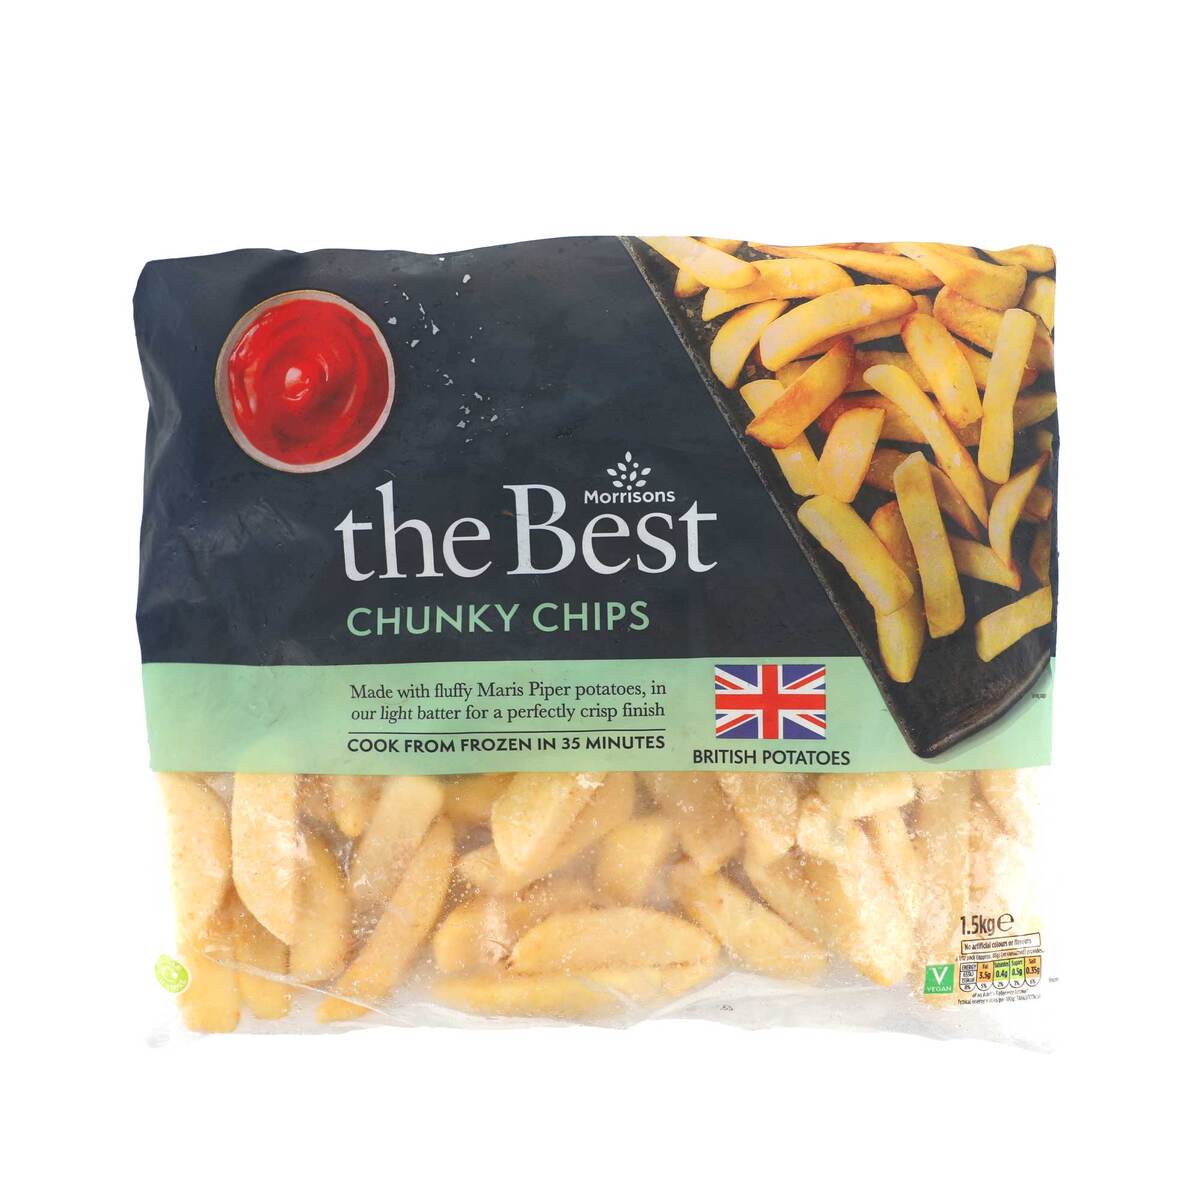 Morrisons The Best Chunky Chips 1.5 kg